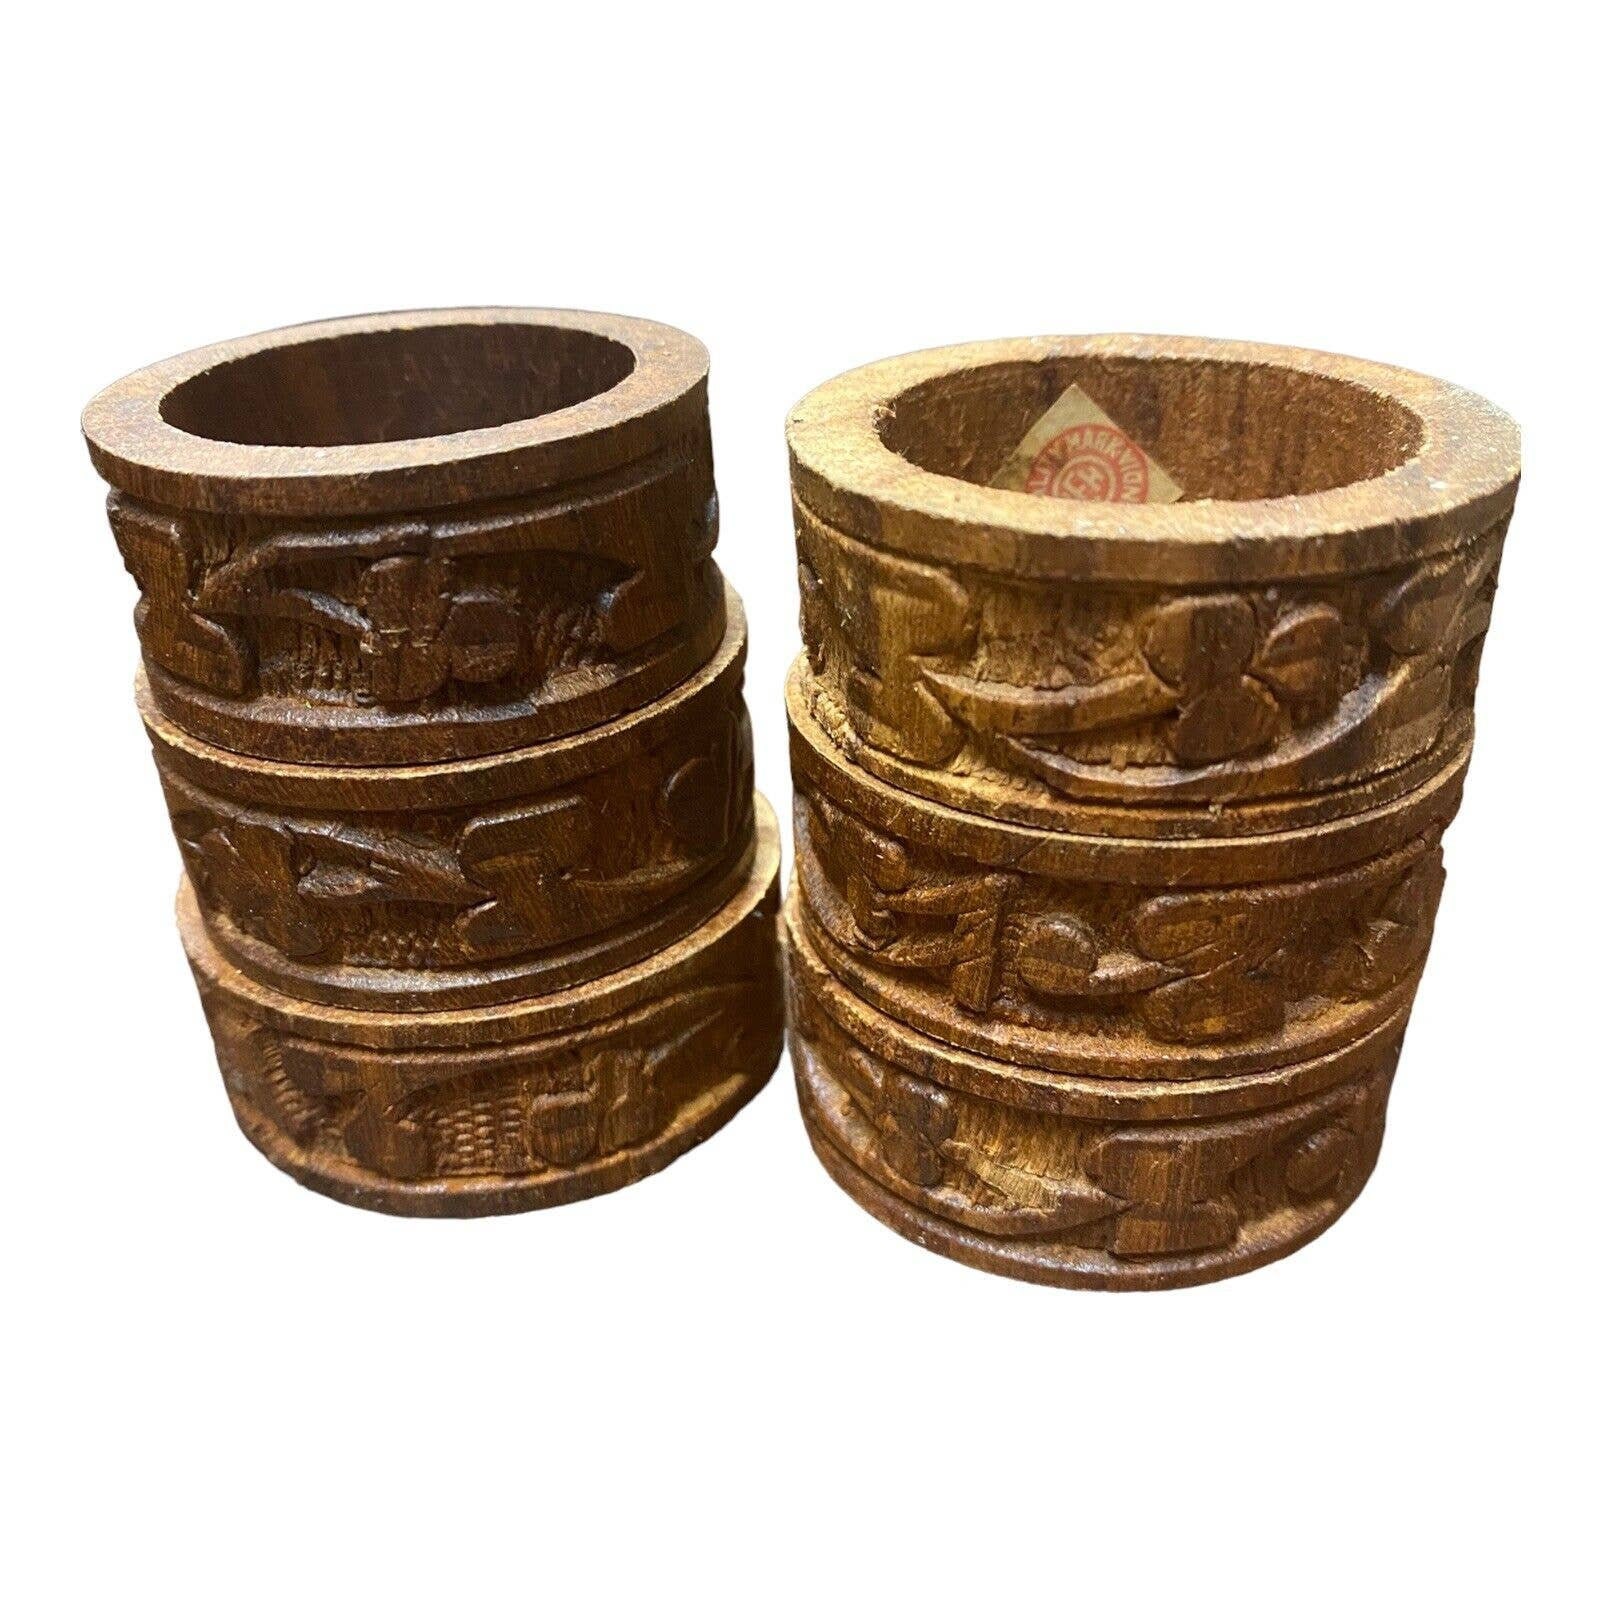 Vintage Wood Napkin Rings From India - 6 Pieces